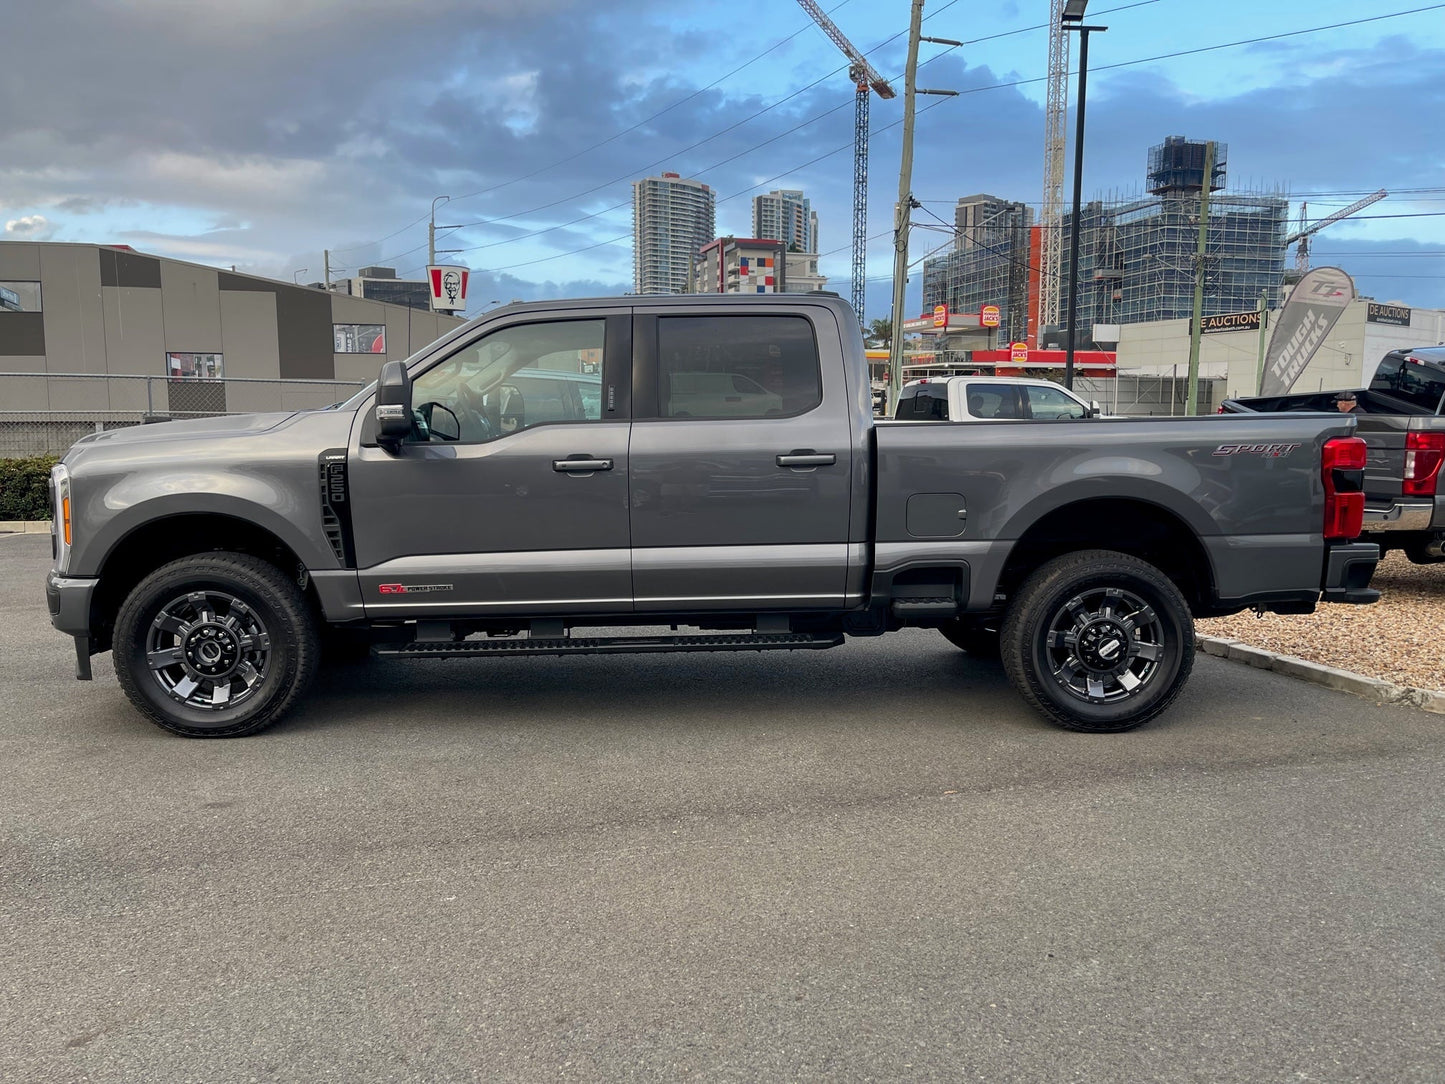 2023 Ford F250 Lariat 6 Seater in Carbonized Grey (STOCK# TT9233)